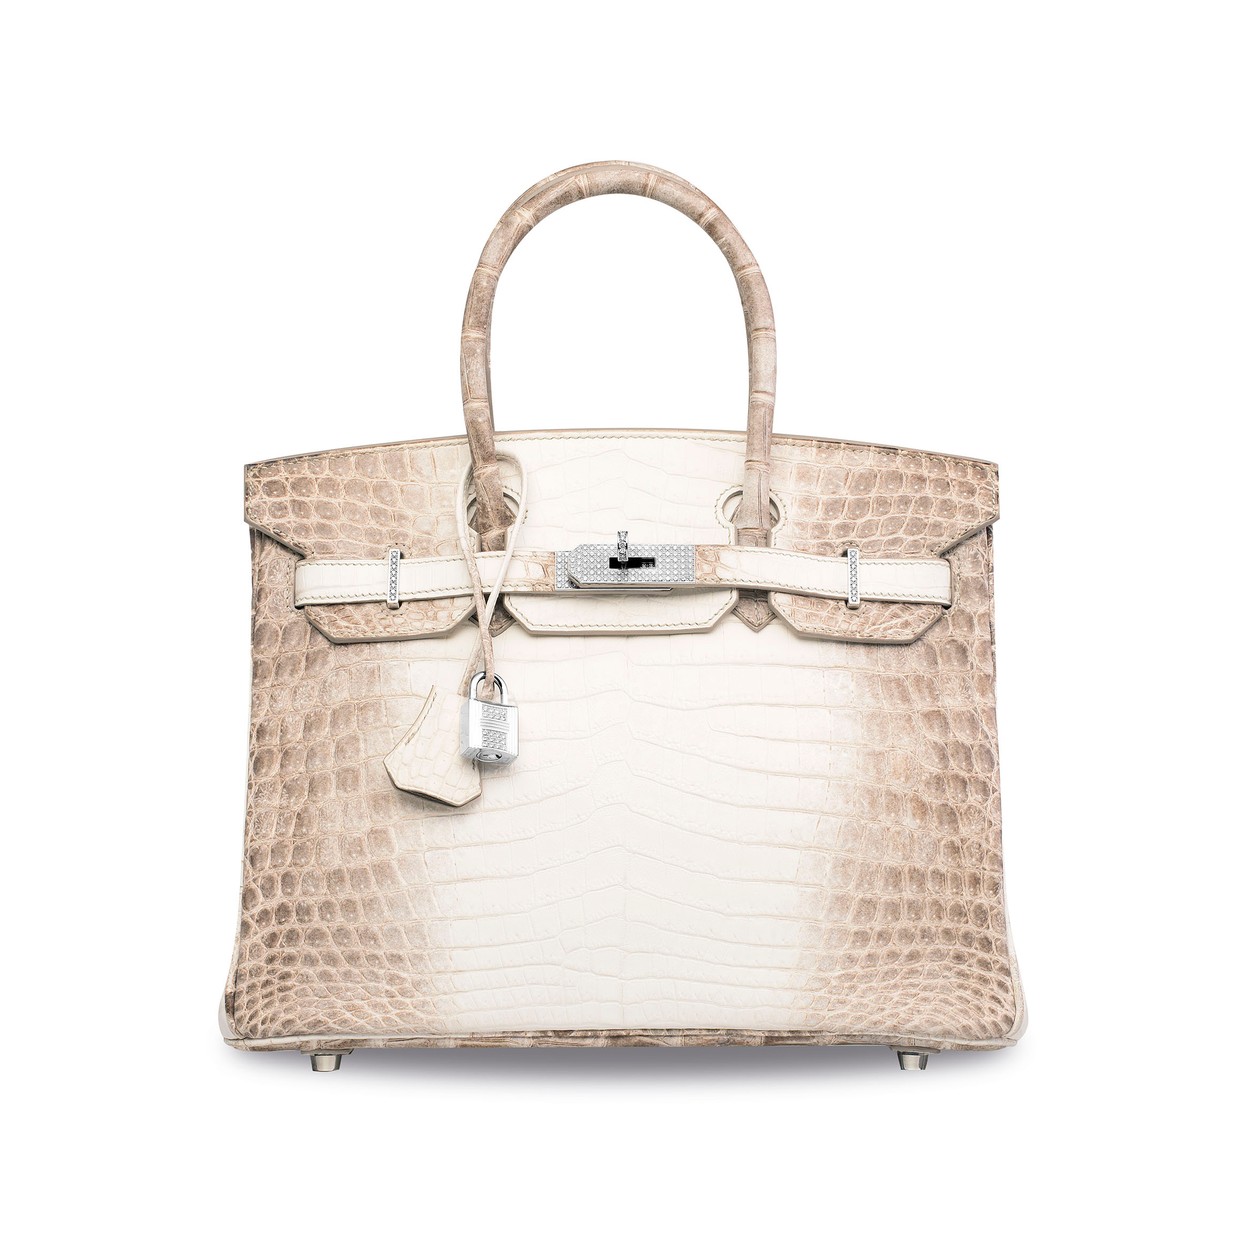 Ferrari Press Agency
Birkin 1
Ref 9308
13/06/2018
See Ferrari text  
Picture credit: Christie’s

A ten-year-old matte white Himalaya Birkin broke the European record for a handbag sold at auction when it fetched £162,500 GBP  / 7,144 USD / €184.320 Euros at Christie's in London — beating the previous record which stood at  £155,000 GBP.Encrusted with 450 diamonds and white gold, the distinctively coloured crocodile skin bag is the most coveted version of the iconic Hermes Birkin range.Fewer than 50 are believed to exist worldwide.The matte white Himalaya was developed by Hermes in 2008, its name inspired by the smoky greys and whites of the snow-capped Himalayan mountains.At 30cm, it is smaller than the original Birkin and made from the hide of farm-raised Nile crocodiles, an African strain of the species that has relatively few bones and is therefore said to have a smoother skin.The bag's white gold diamond-encrusted detailing adds to the value as does the fact so few have been made.The world record-holding Himalaya bag, sold in Hong Kong last year for £292,992 GBP was 'Grade 1,' meaning it was brand new, whereas the one sold in London on June 12 was in Grade 2 condition, which means it has been used.Differences in condition can mean as much as 20 per cent in value.While most second-hand handbags depreciate in value, Hermes Birkins are one of the very few designs to sell for more on the secondary market than their original price.Some generate returns of about 30 per cent a year, and a study by Baghunter — an online marketplace for buying and selling luxury handbags — found Birkin bags have actually outperformed both the American stock market and the price of gold.The French luxury fashion house Hermes designed what became known as the Birkin in 1981.Named after the singer and actress Jane Birkin, it has become one of the most sought-after accessories in the world, but it began as a quest for the perfect holdall.Birkin had met the chief executive of Hermes on a flight from Paris to London, where he offered to design her a holdall and asked if the company could name it after her.She said she was 